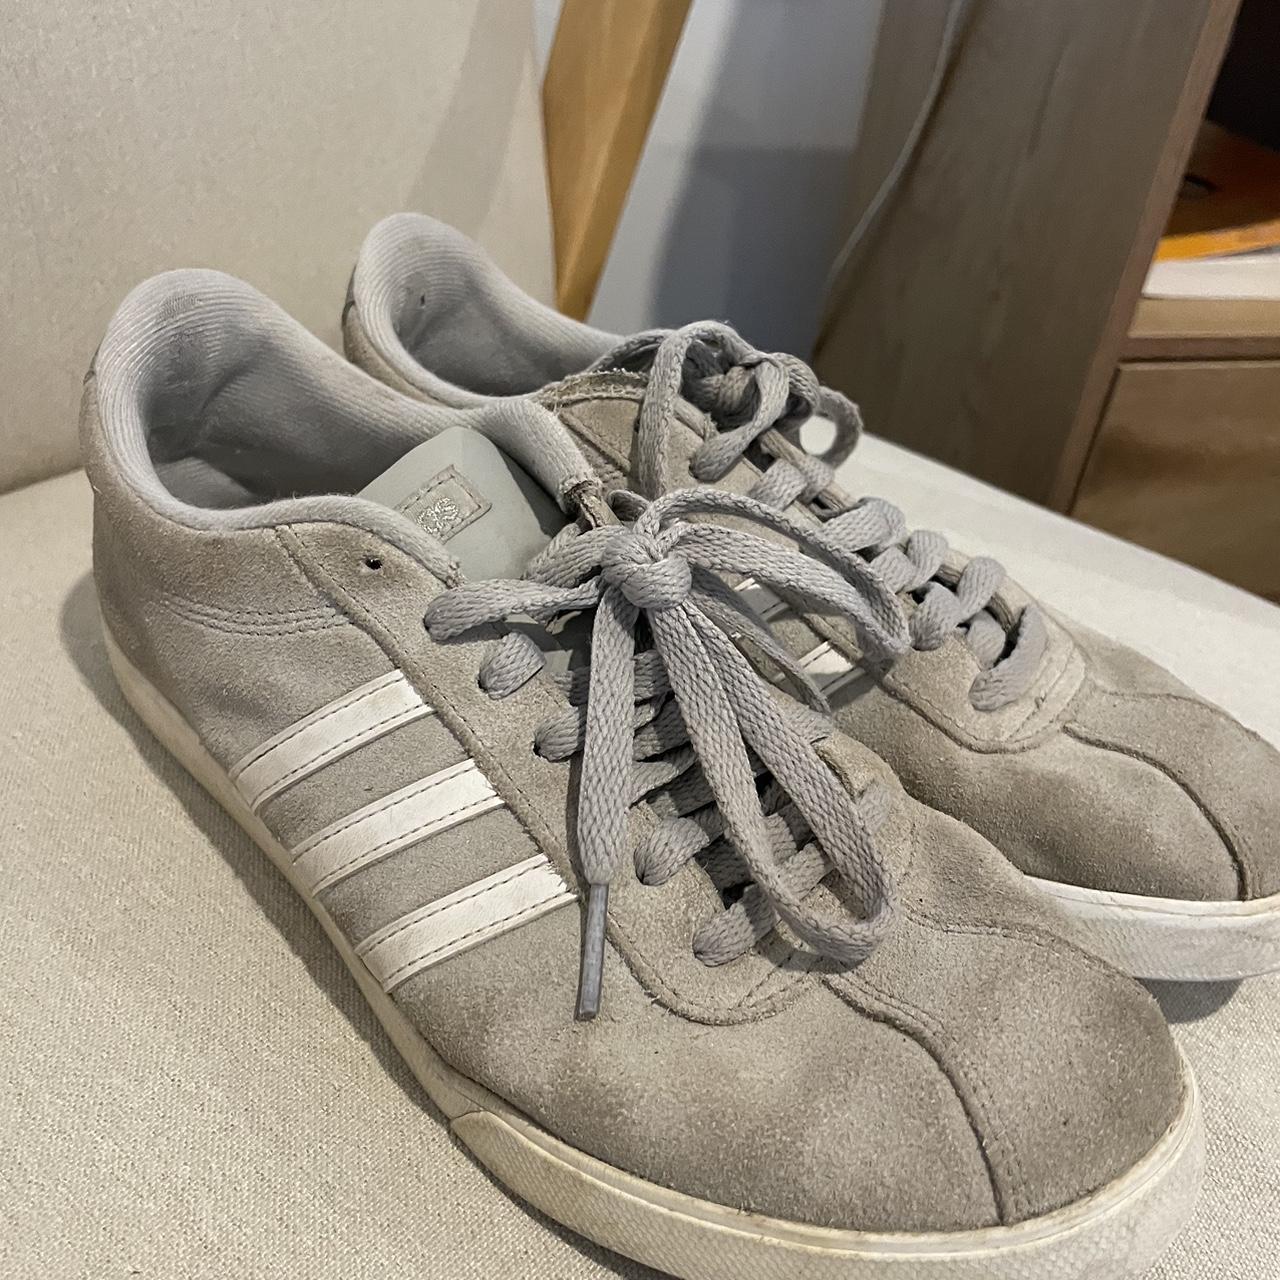 Adidas court side gazelle grey and white trainers /... - Depop